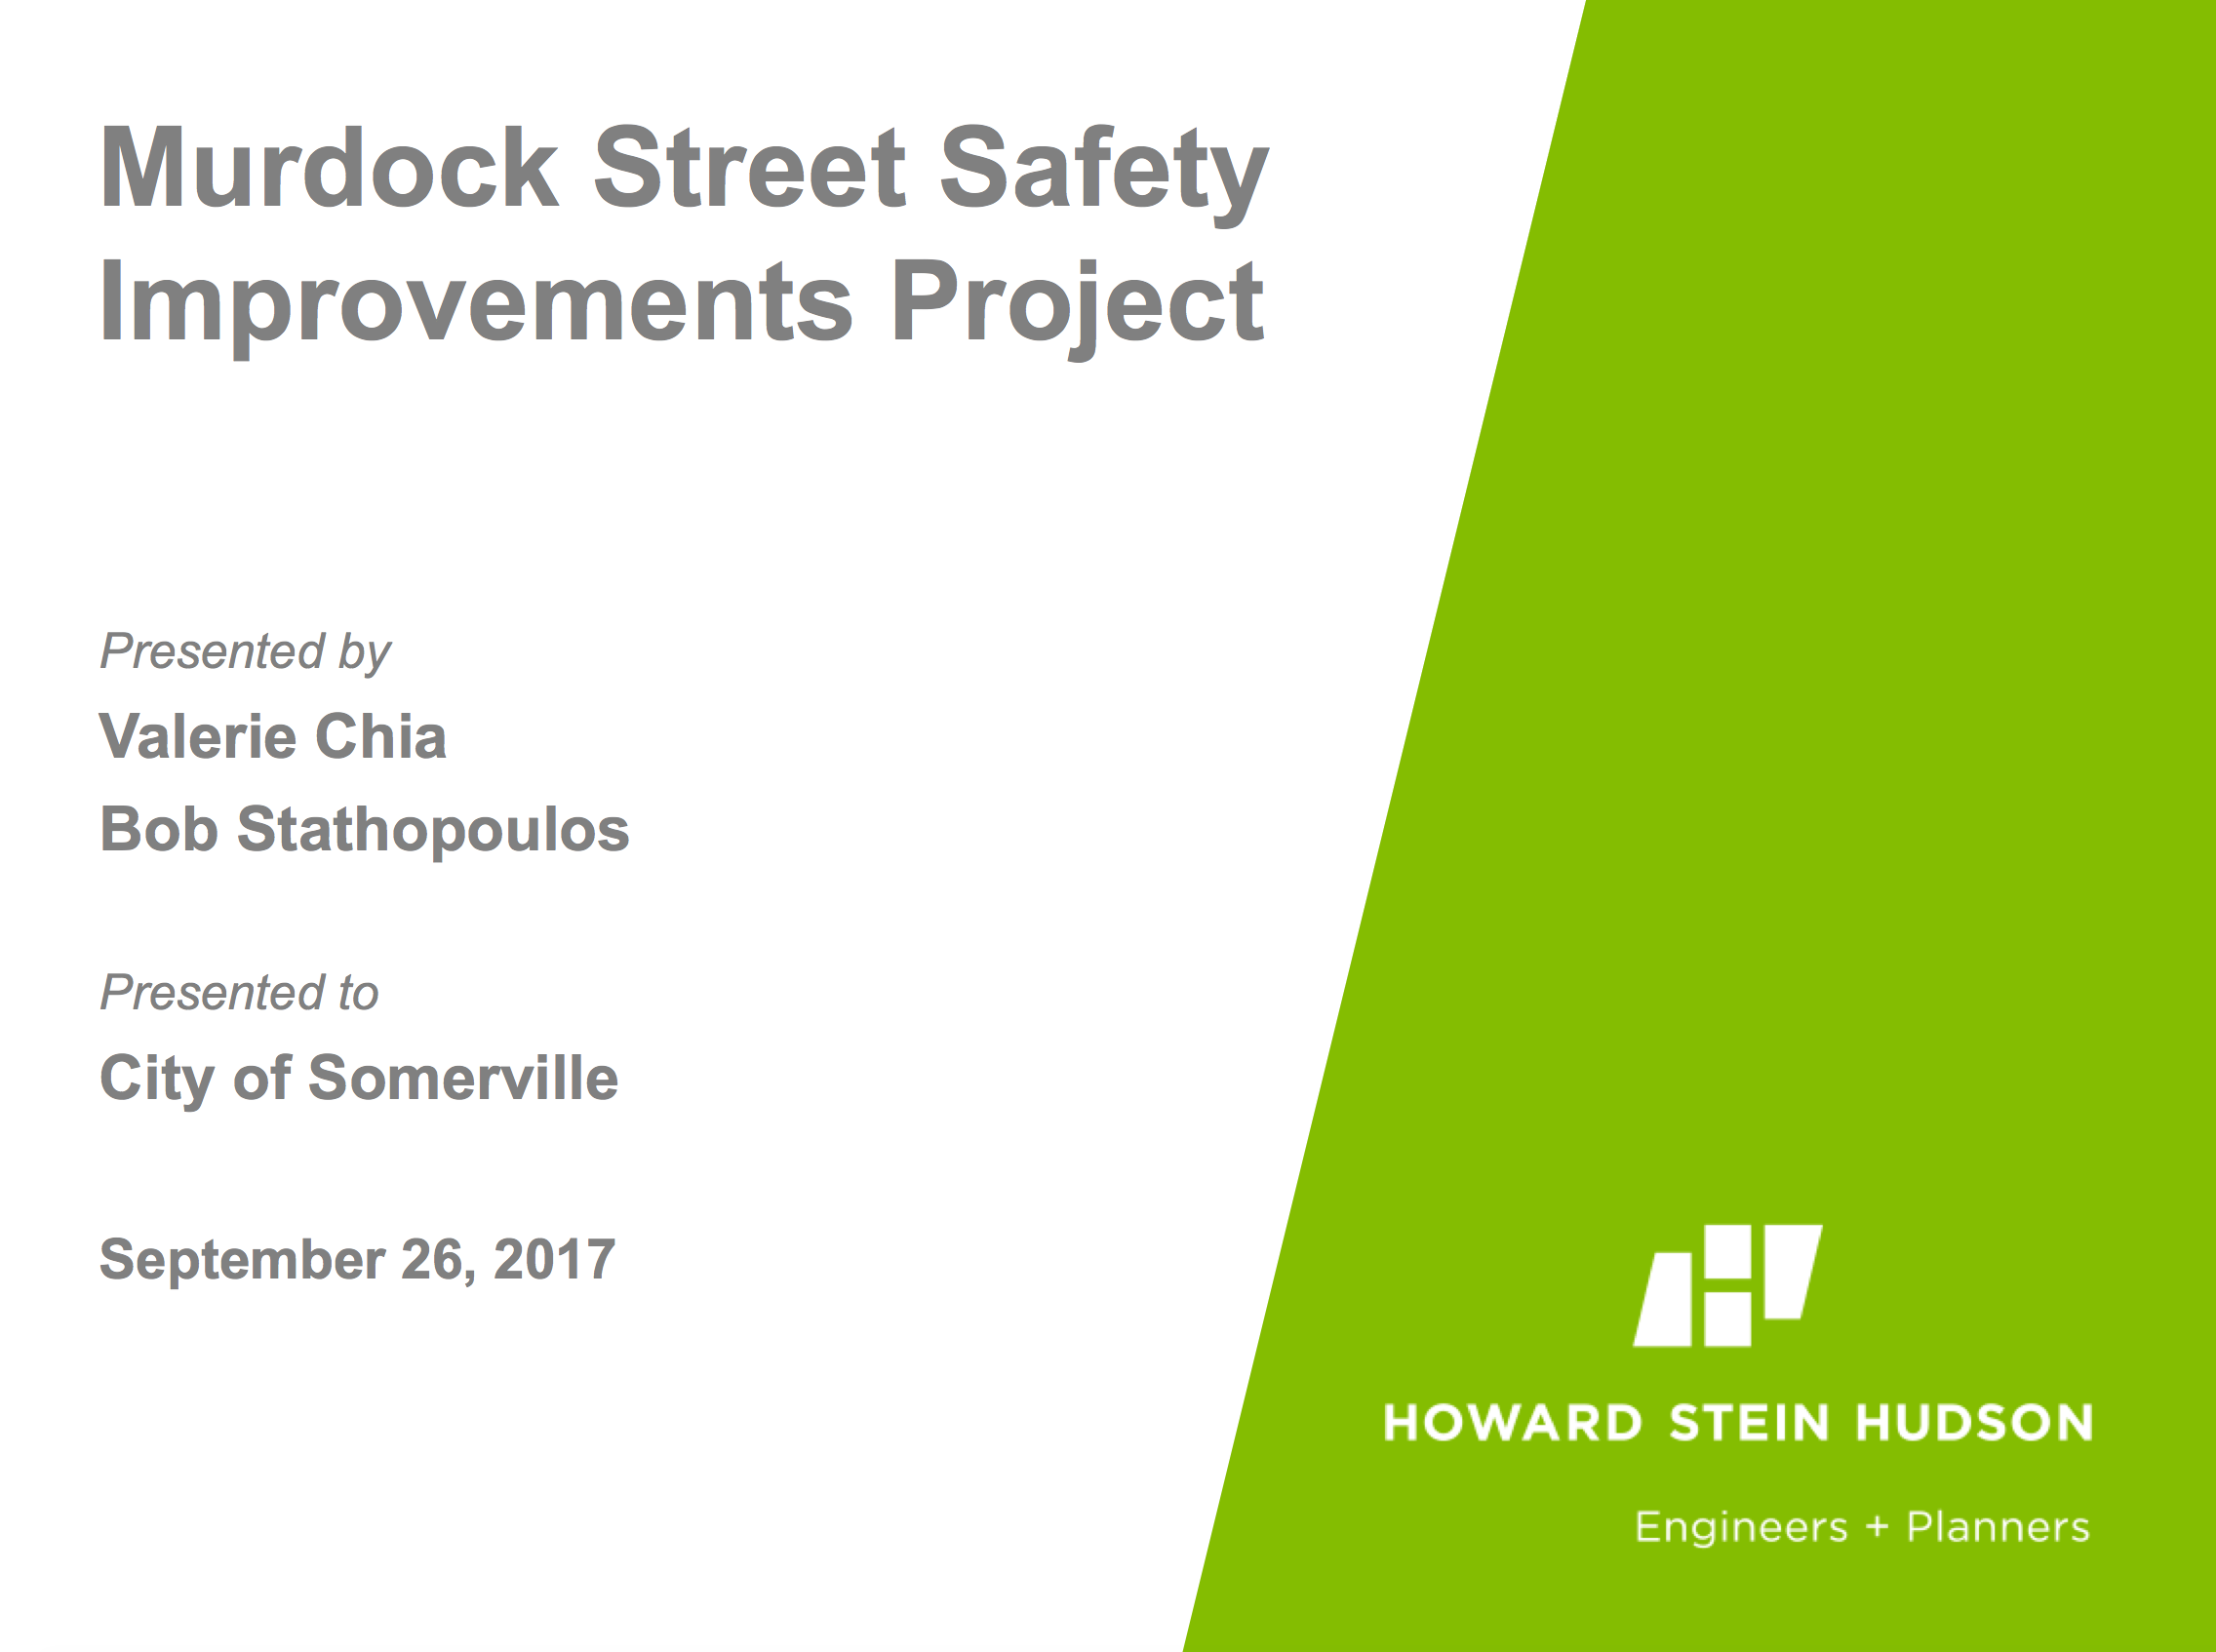 PDF preview links to a presentation on the Murdock Streetscape Improvements Project